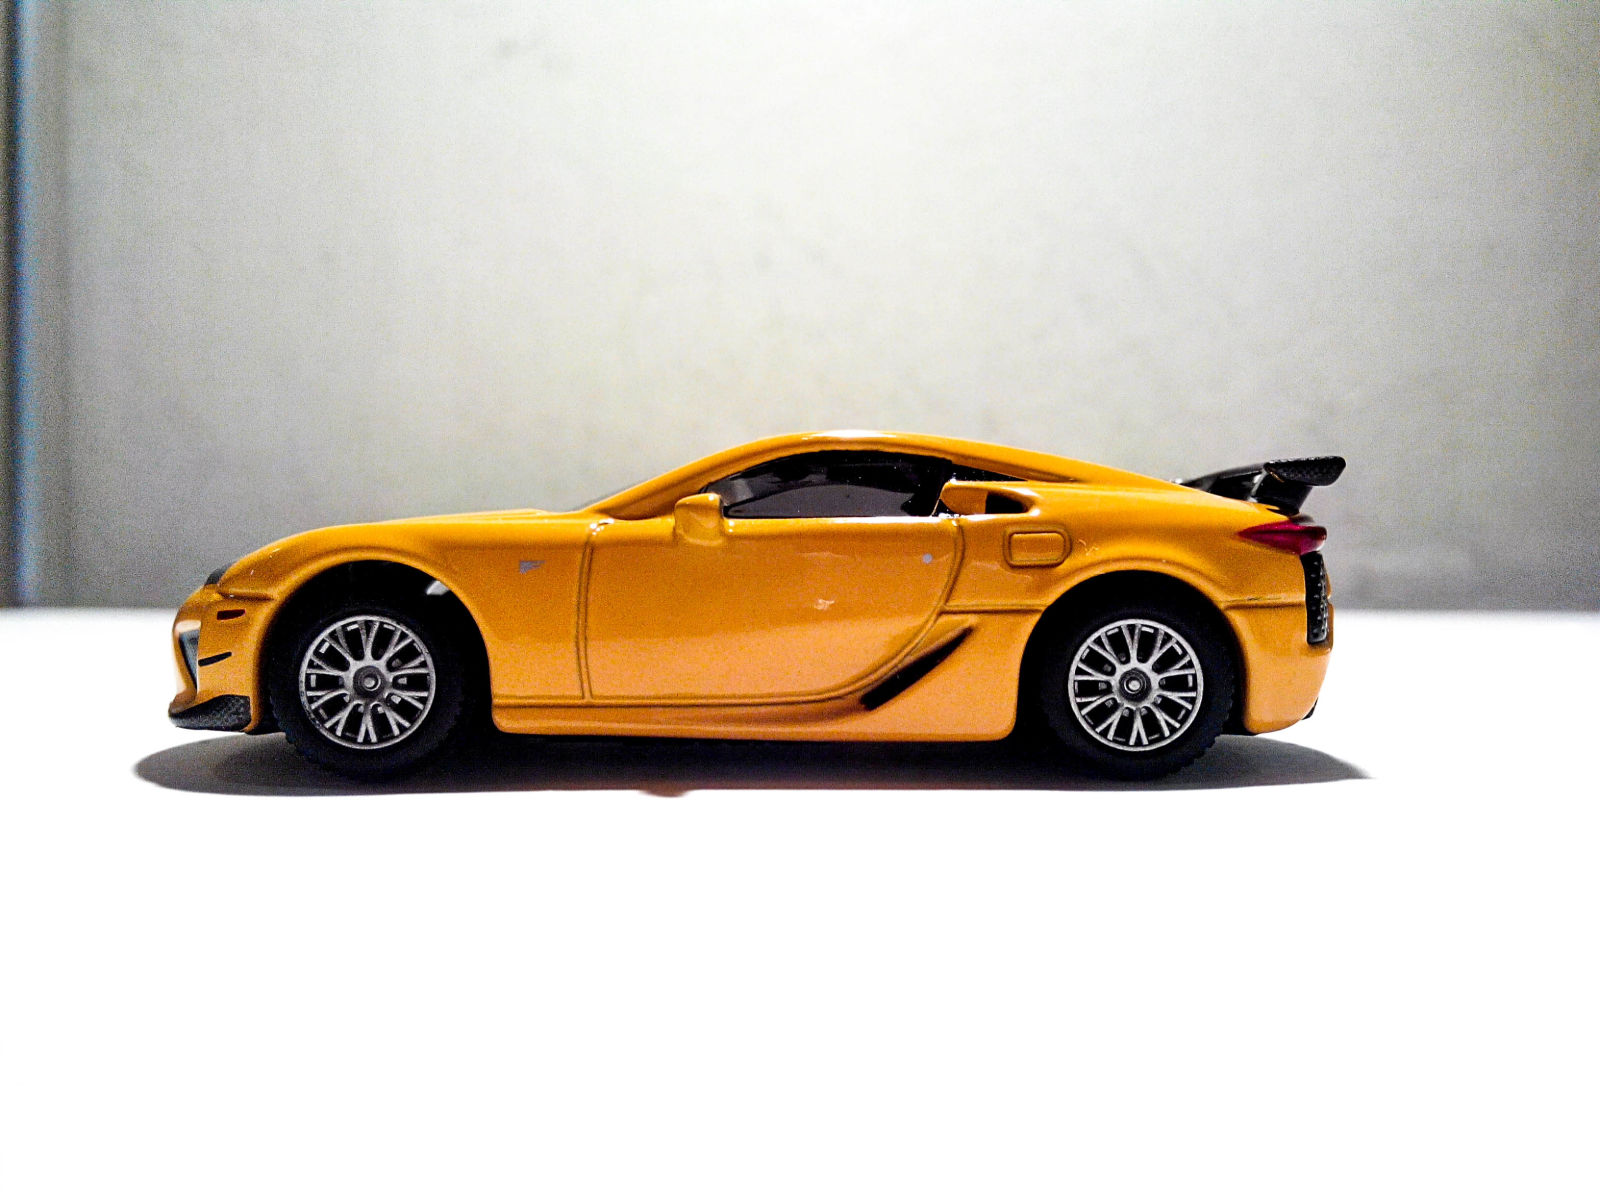 Illustration for article titled Pearls of the Far East : Tomica Limited Lexus LFA